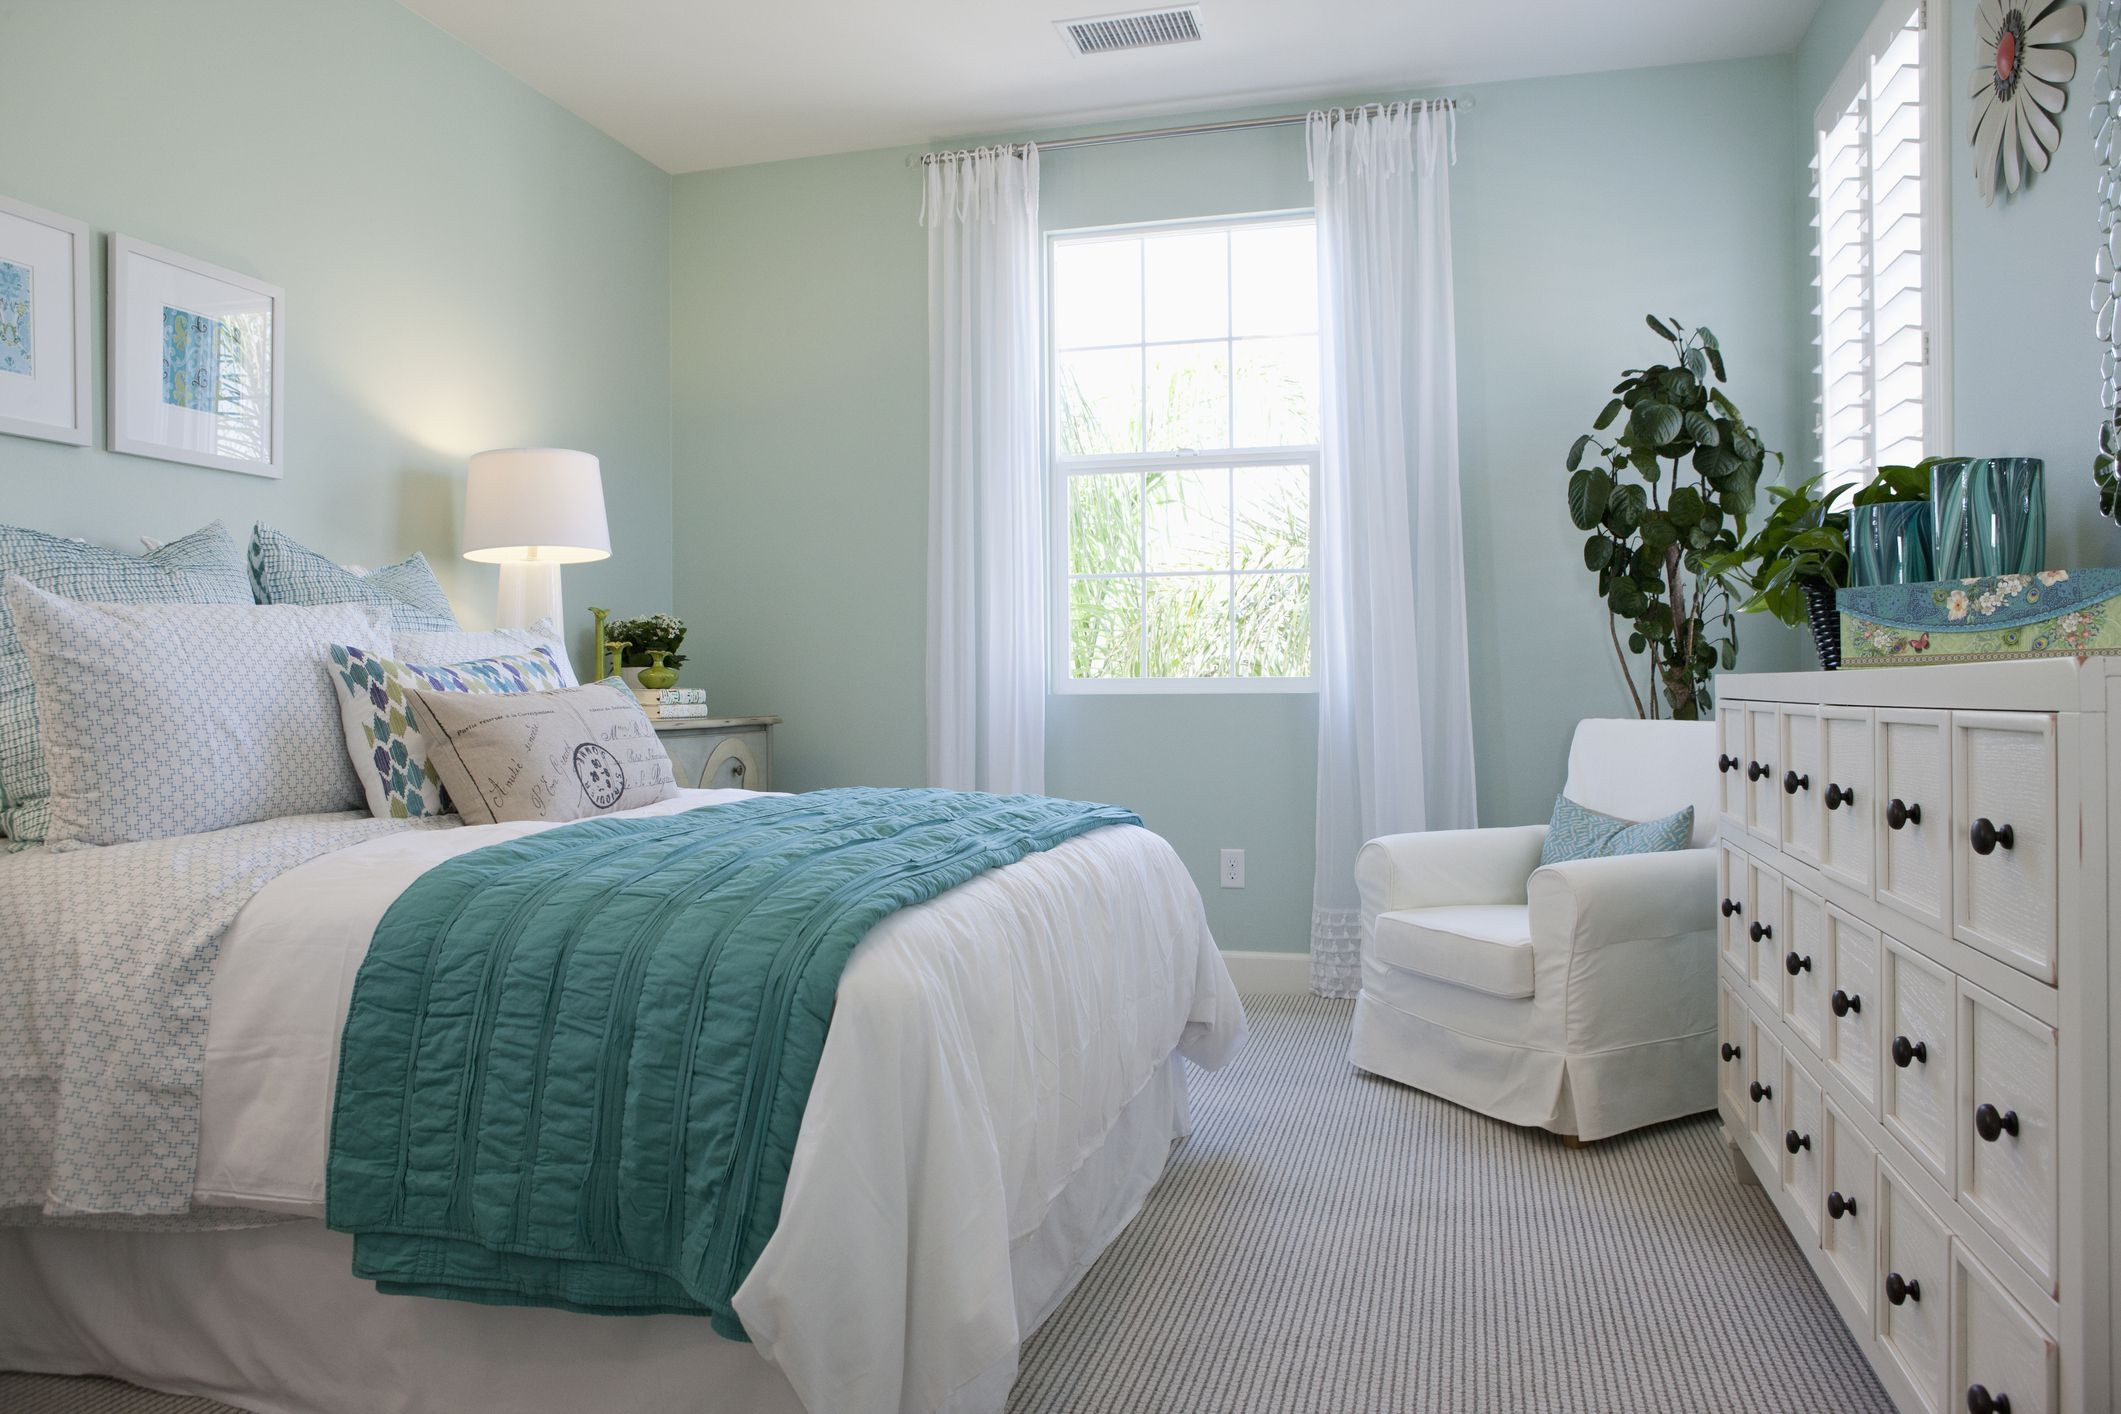 Best Color For Bedroom
 How to Choose the Right Paint Colors for Your Bedroom